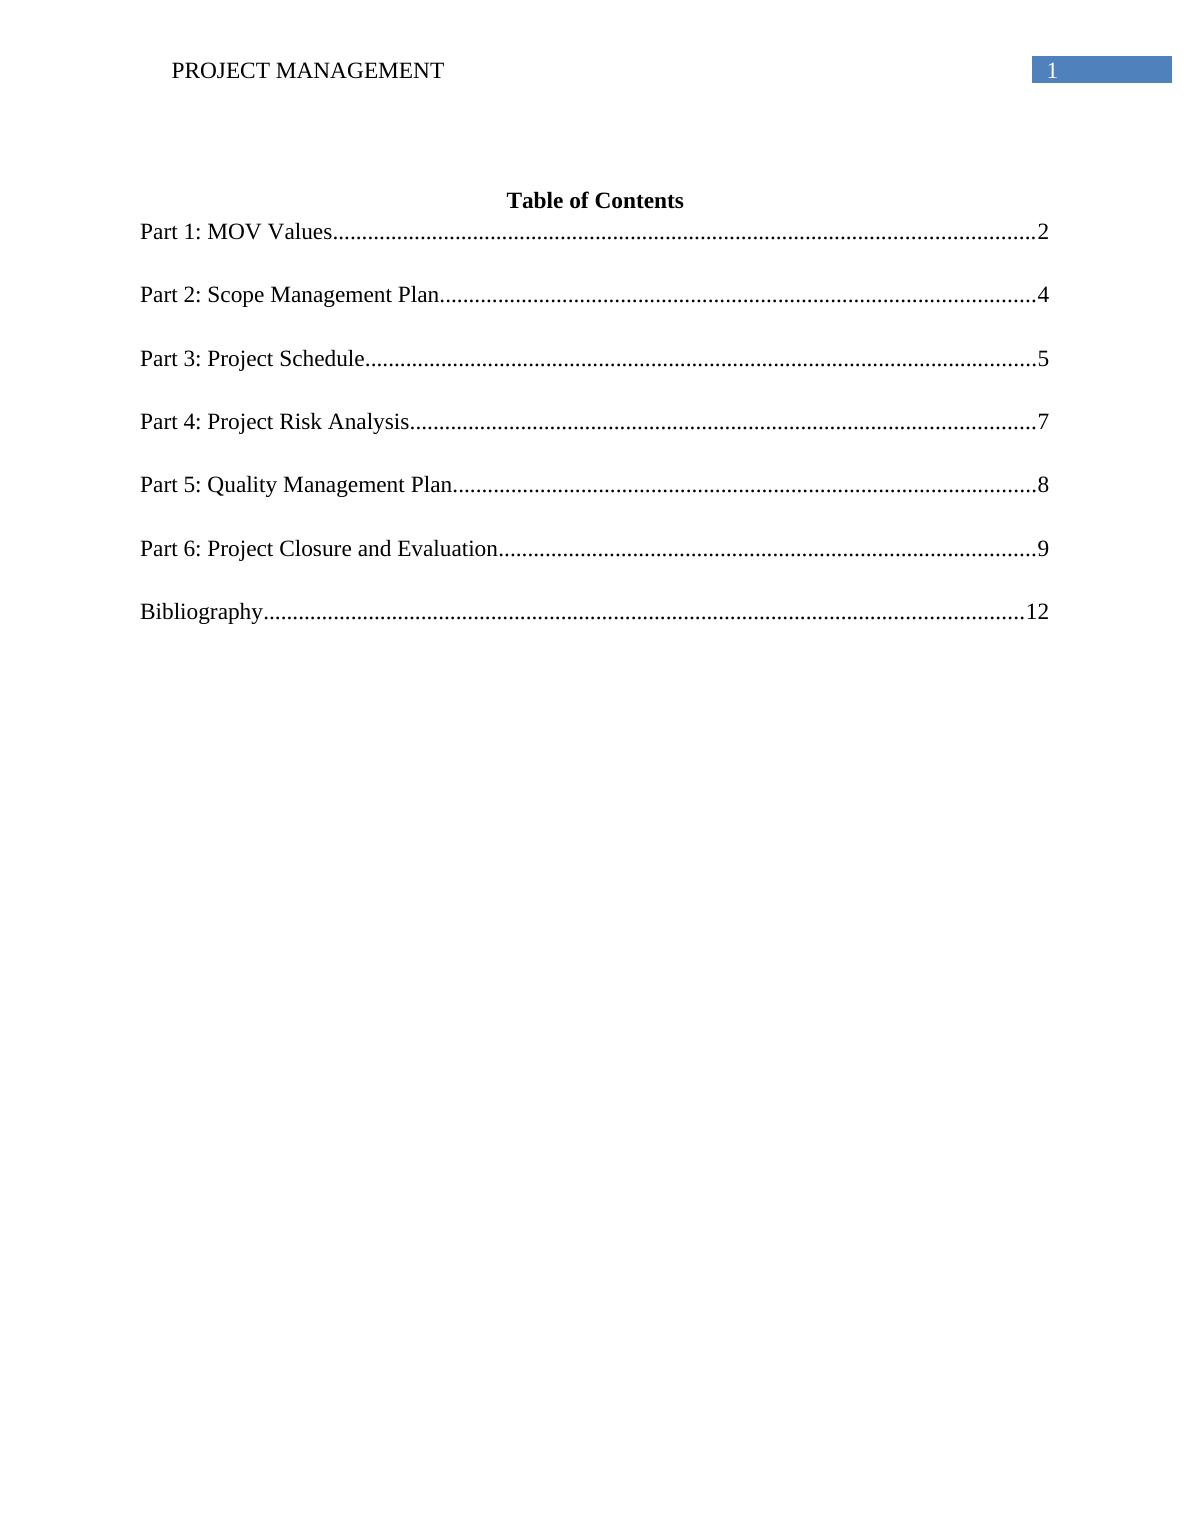 Project Management Assignment- RALS Ticketing System_2